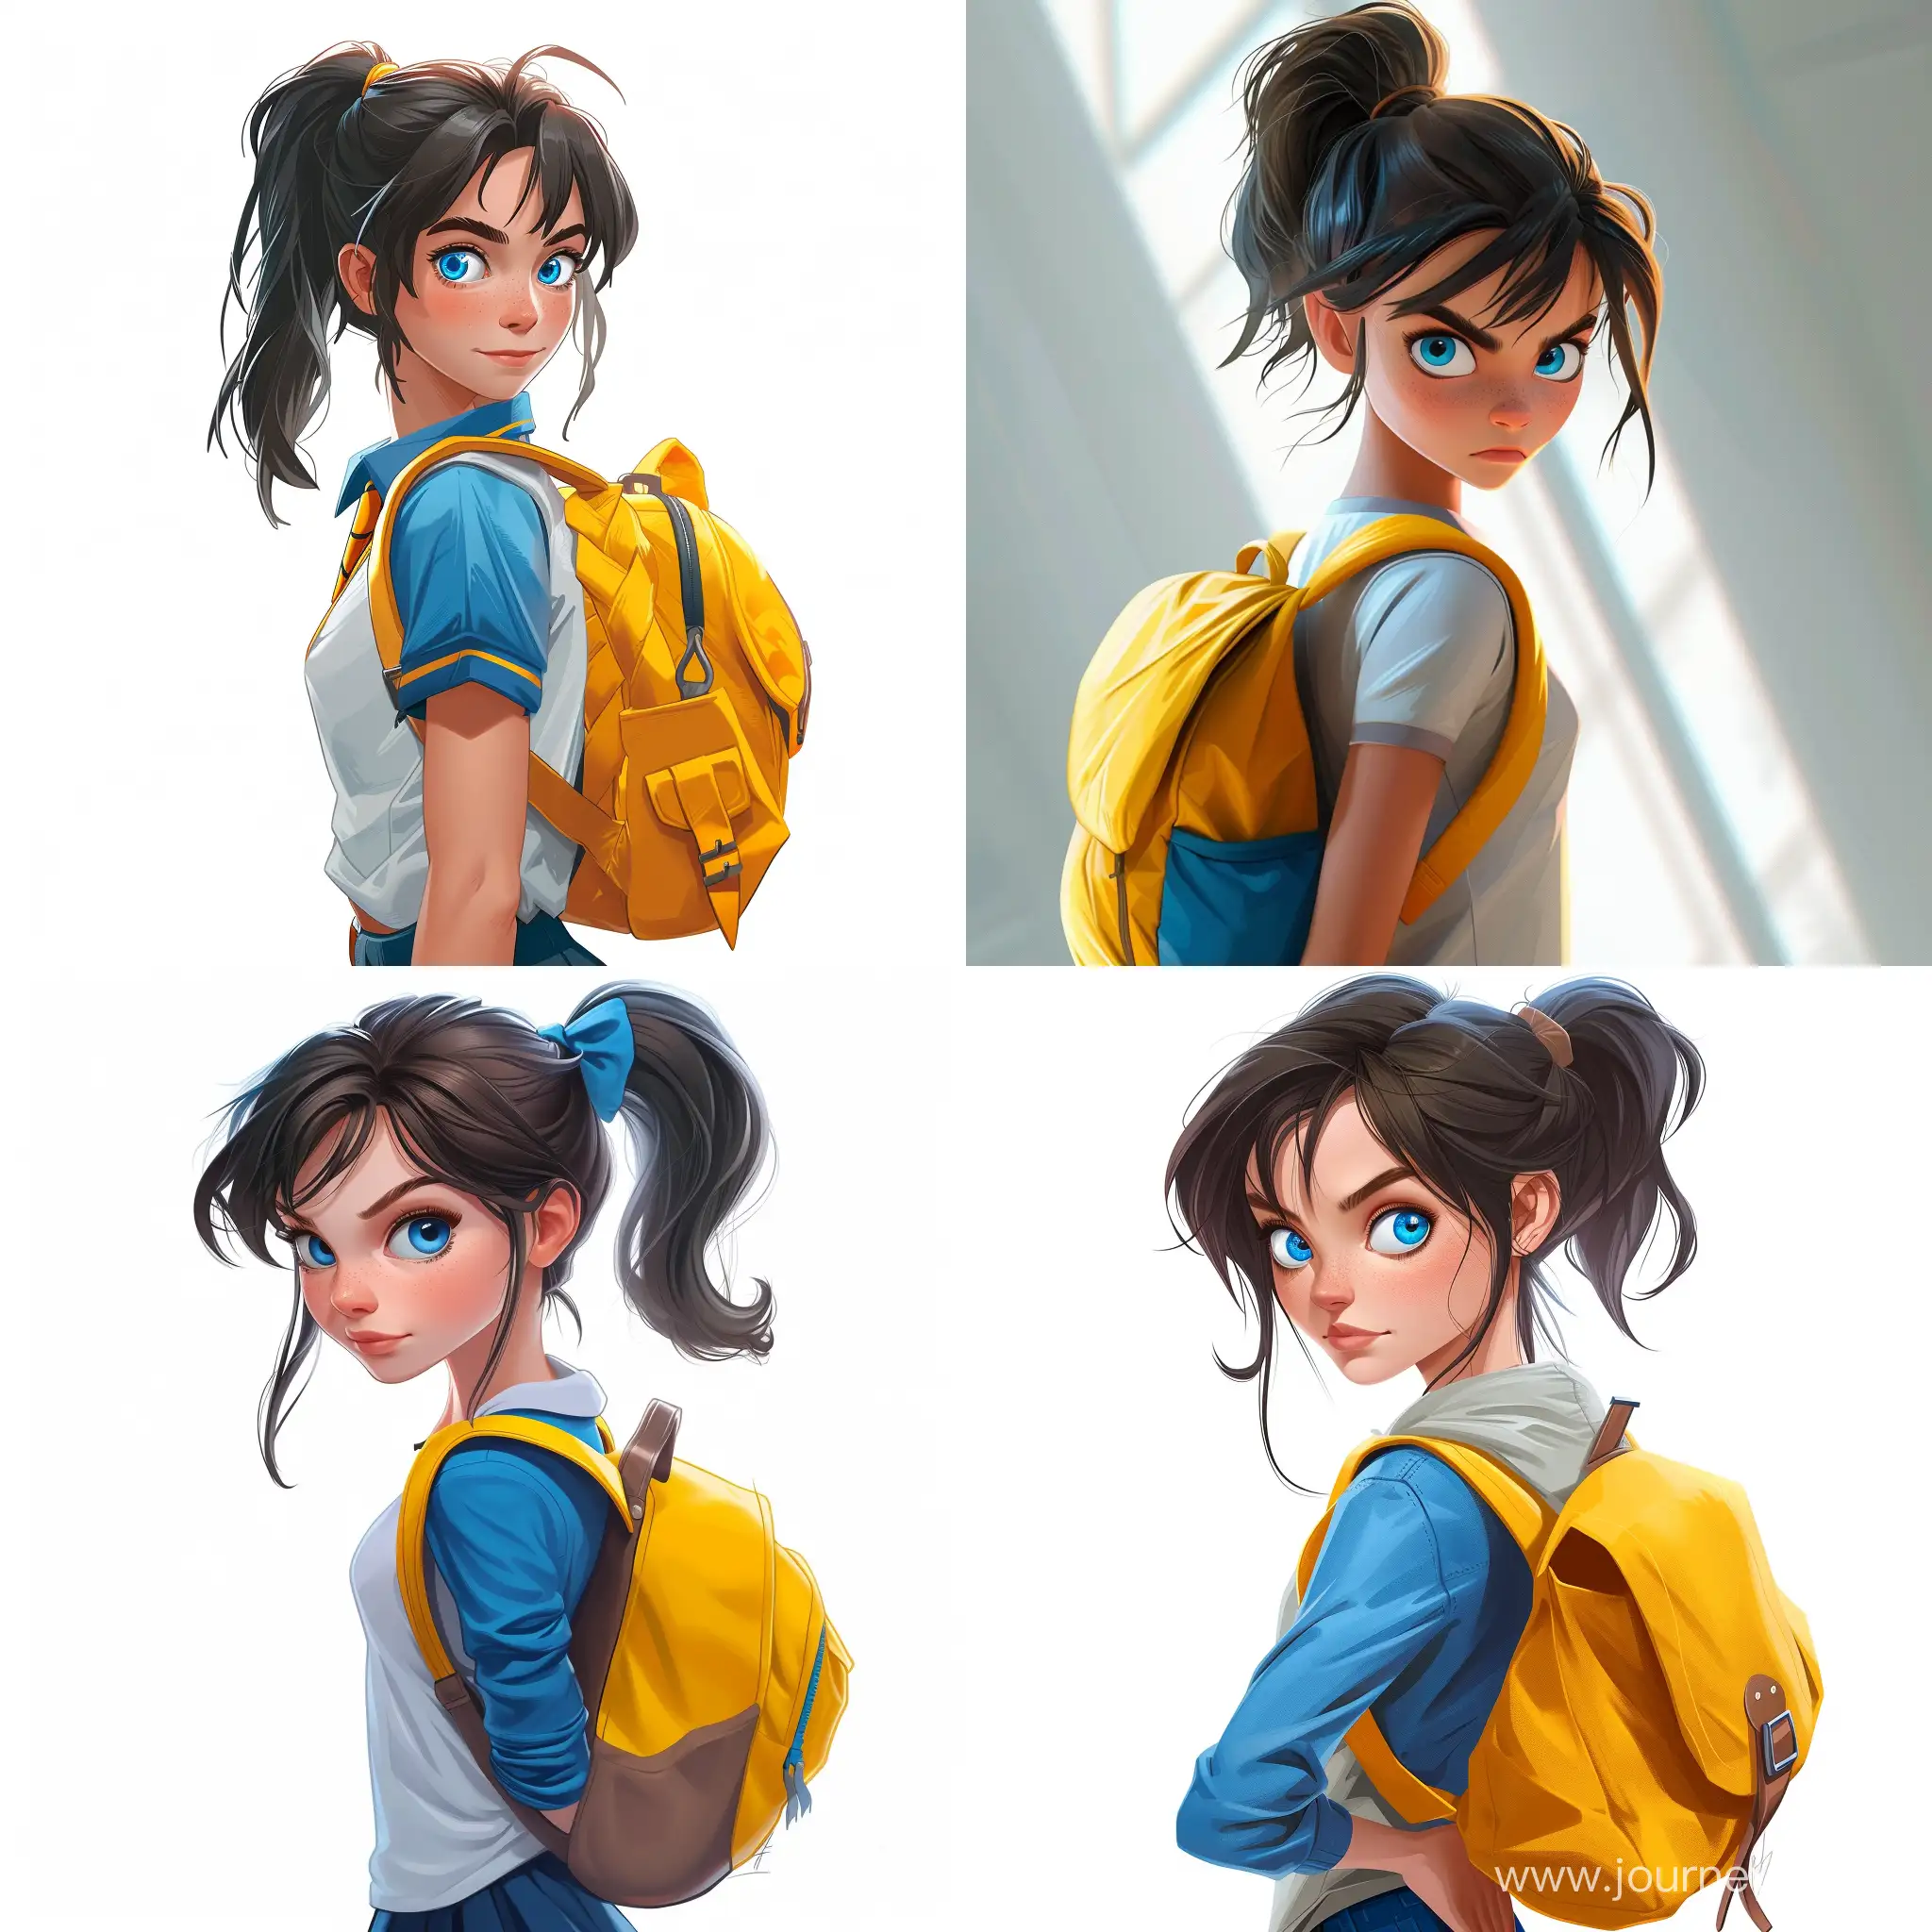 Beautiful girl, disheveled dark hair tied in a ponytail, blue eyes, white skin, teenager, 15 years old, Hogwarts student, Ravenclaw shape: bronze and blue, bright yellow backpack, mocking, full height, high quality, high detail, cartoon art